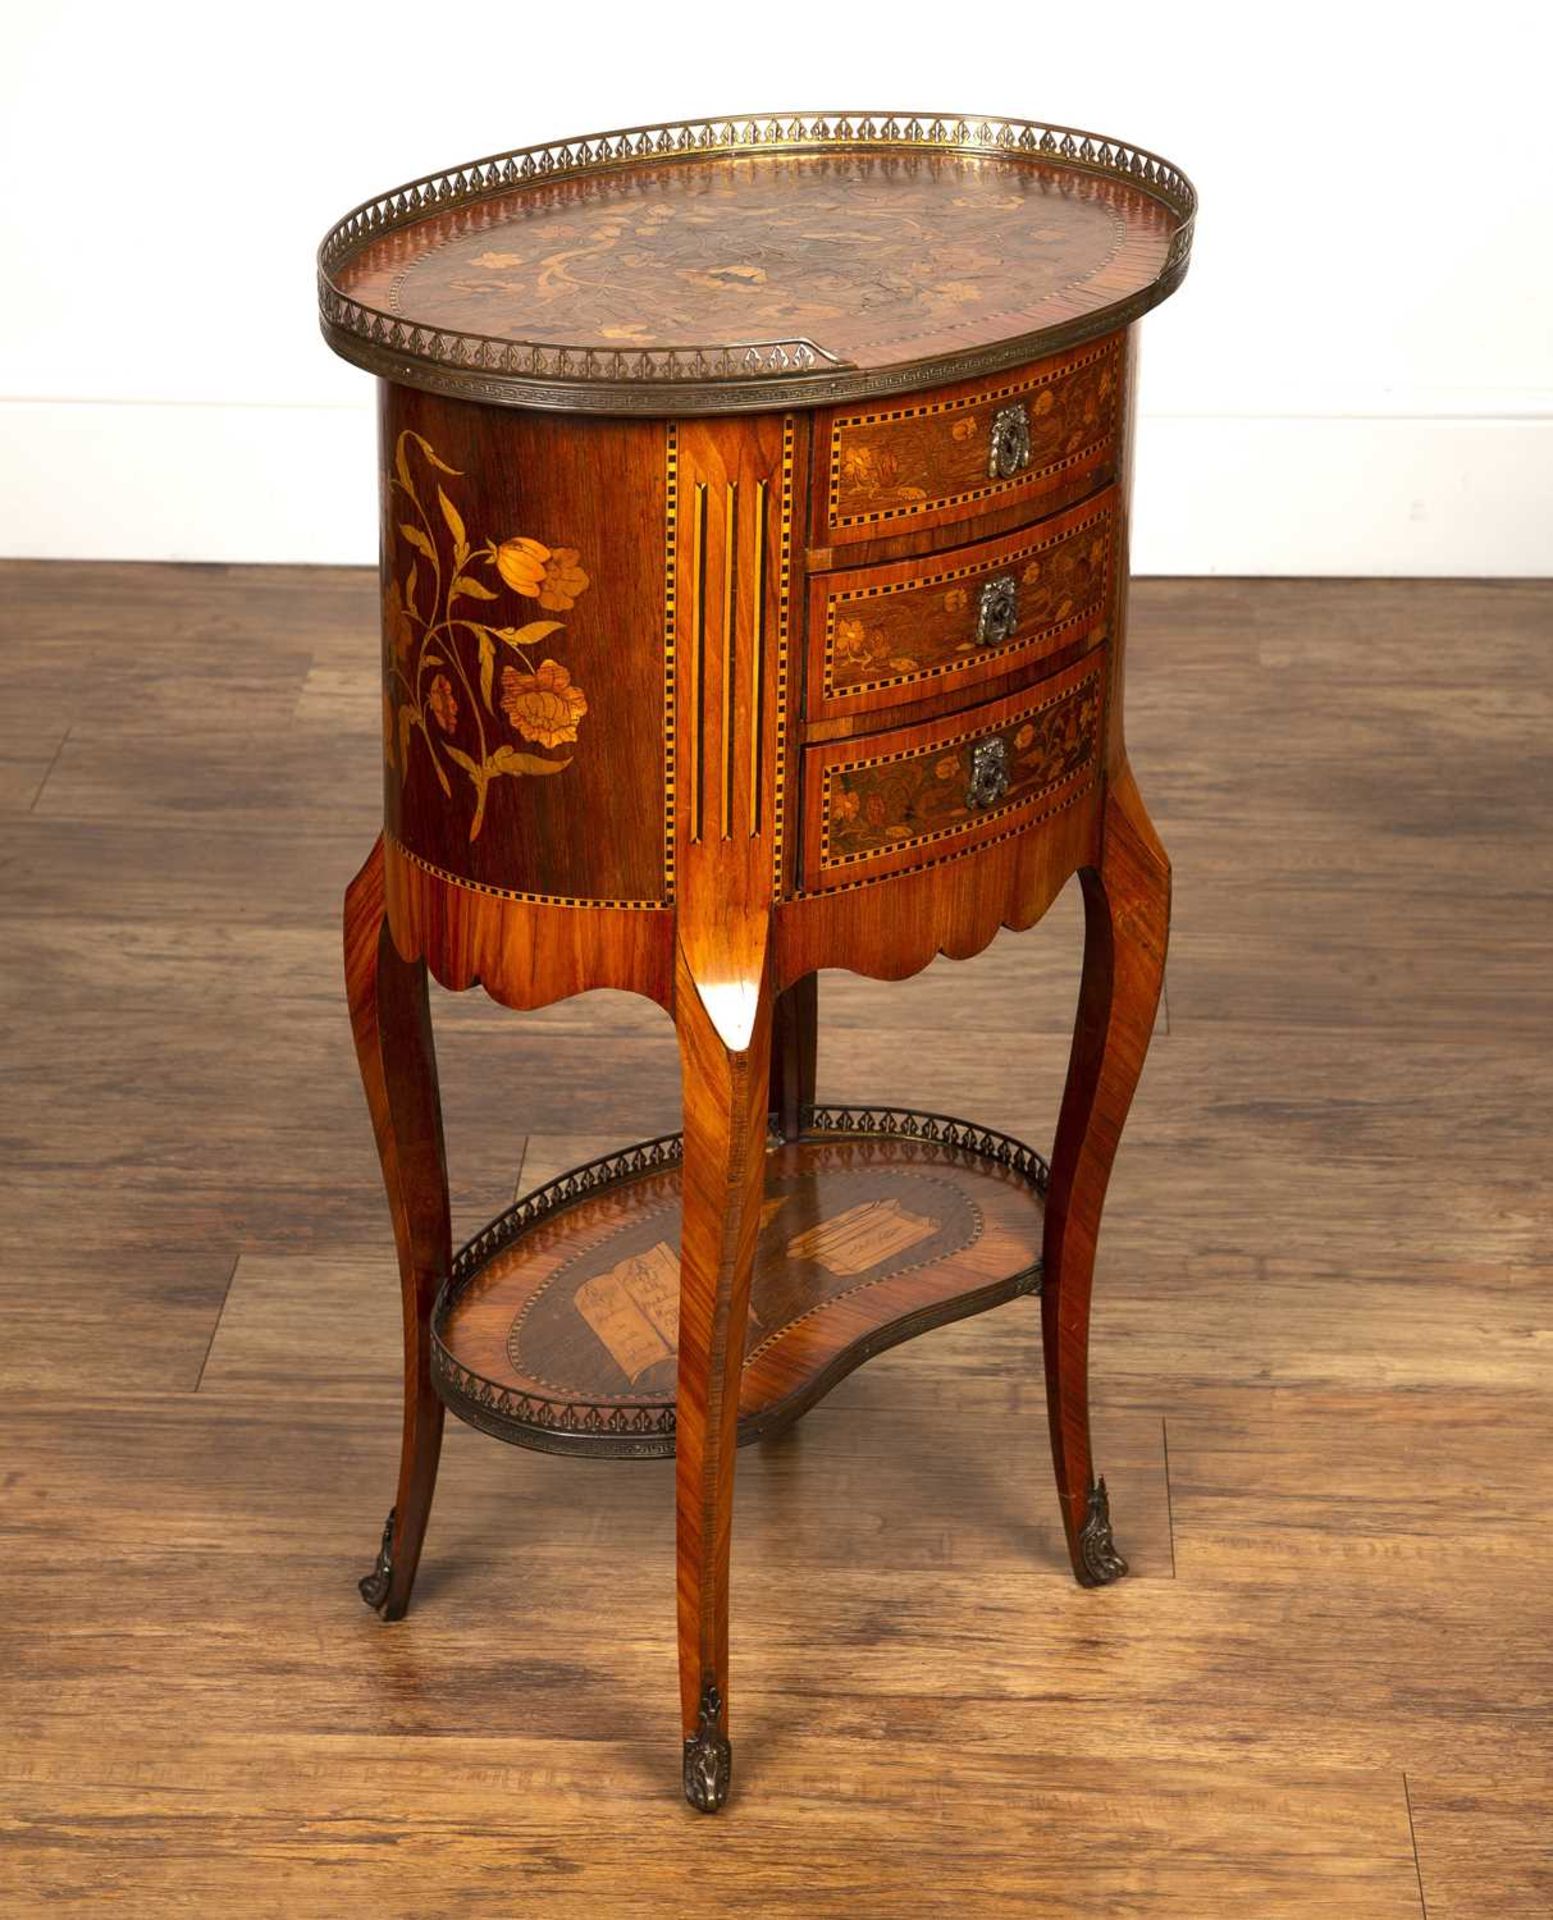 French marquetry side table of oval form, 19th Century, with brass galleried top, the top inlaid - Image 2 of 7